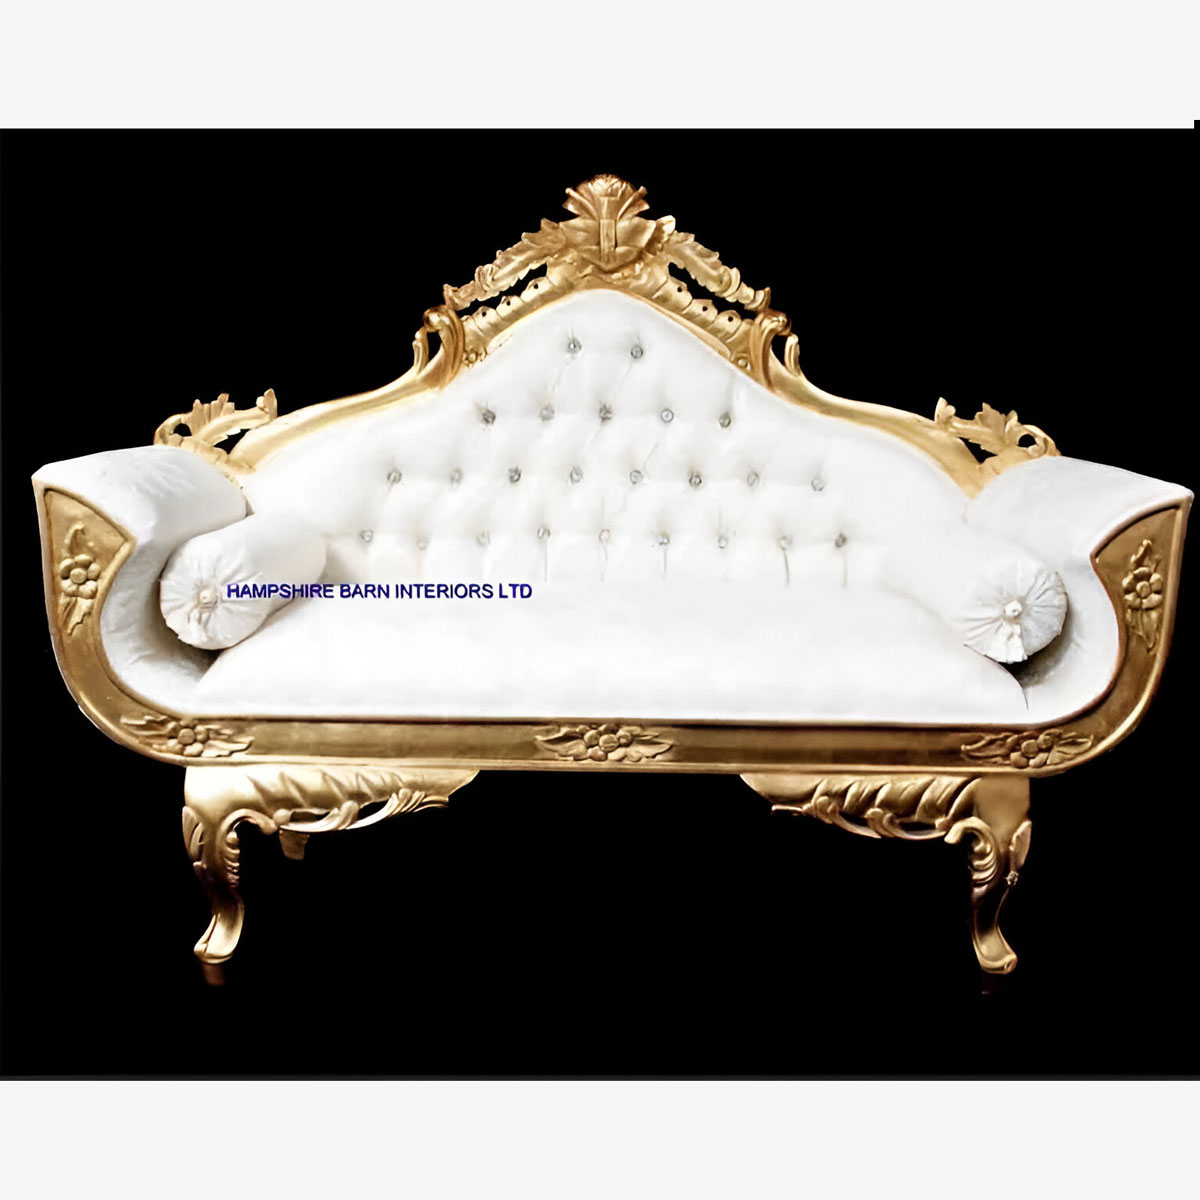 Ornate Palace Wedding Sofa In Gold Leaf Frame And Ivory Cream Fabric With Crystal Buttons 1 - Hampshire Barn Interiors - Ornate Palace Wedding Sofa In Gold Leaf Frame And Ivory Cream Fabric With Crystal Buttons -